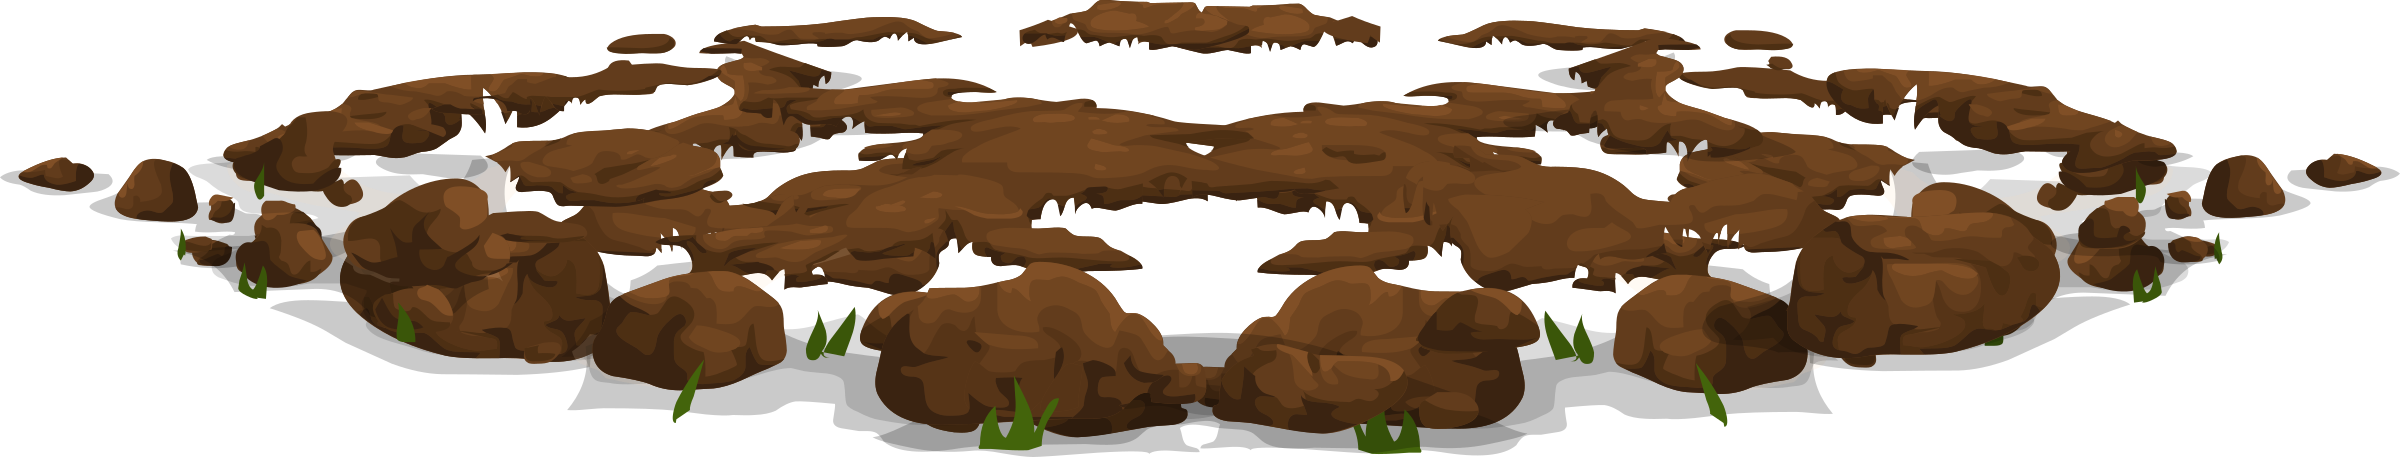  collection of dirt. Seedling clipart soil pile